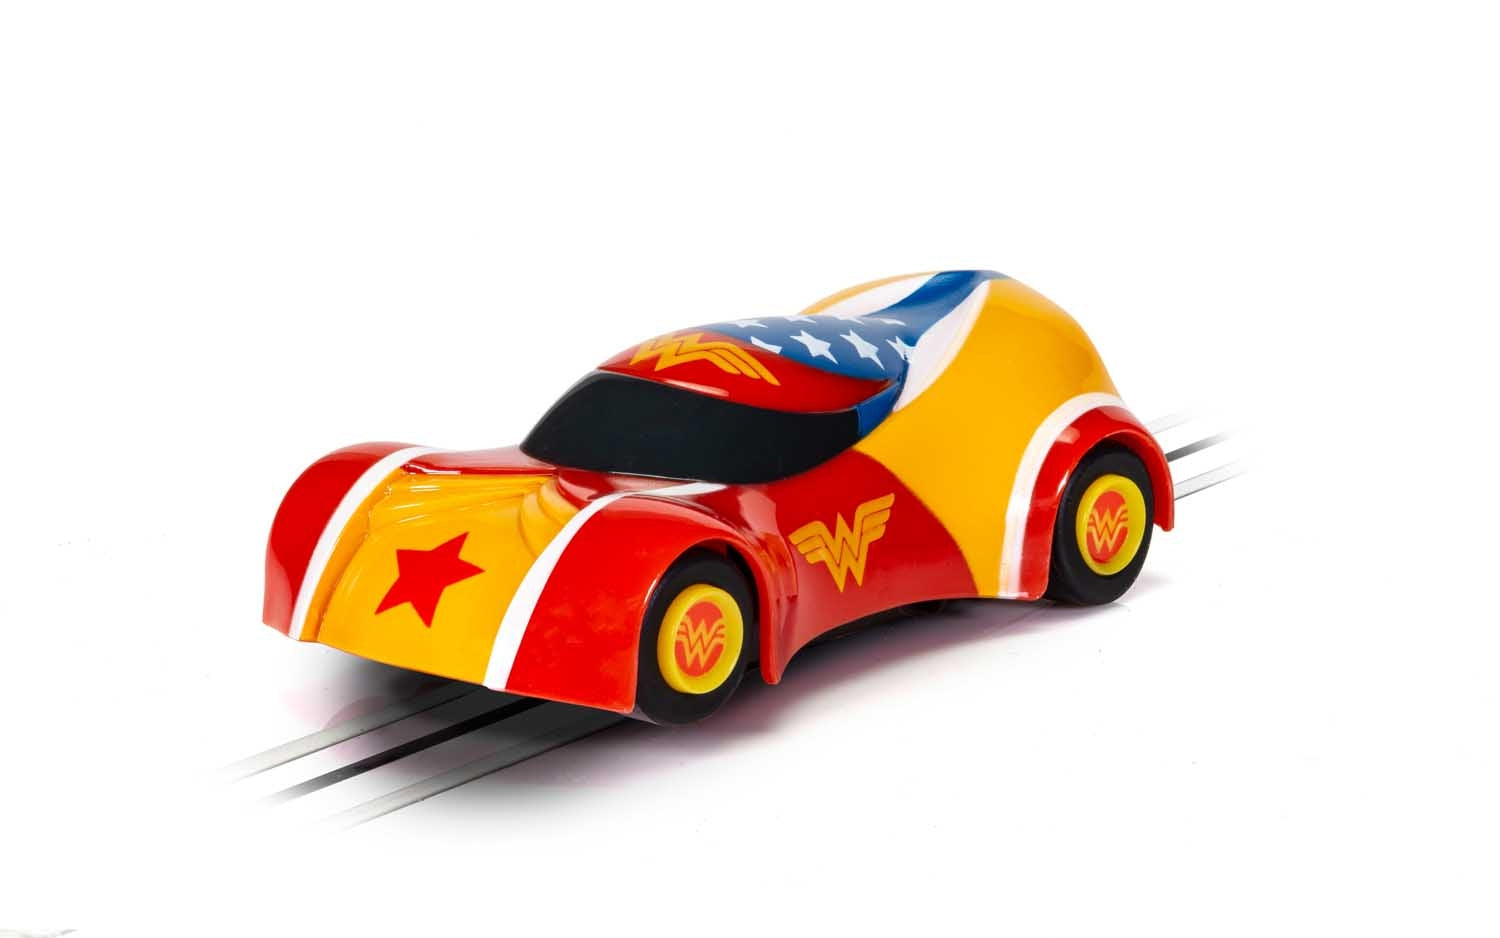 Scalextric Micro Justice League Wonder Woman Scalextric Car